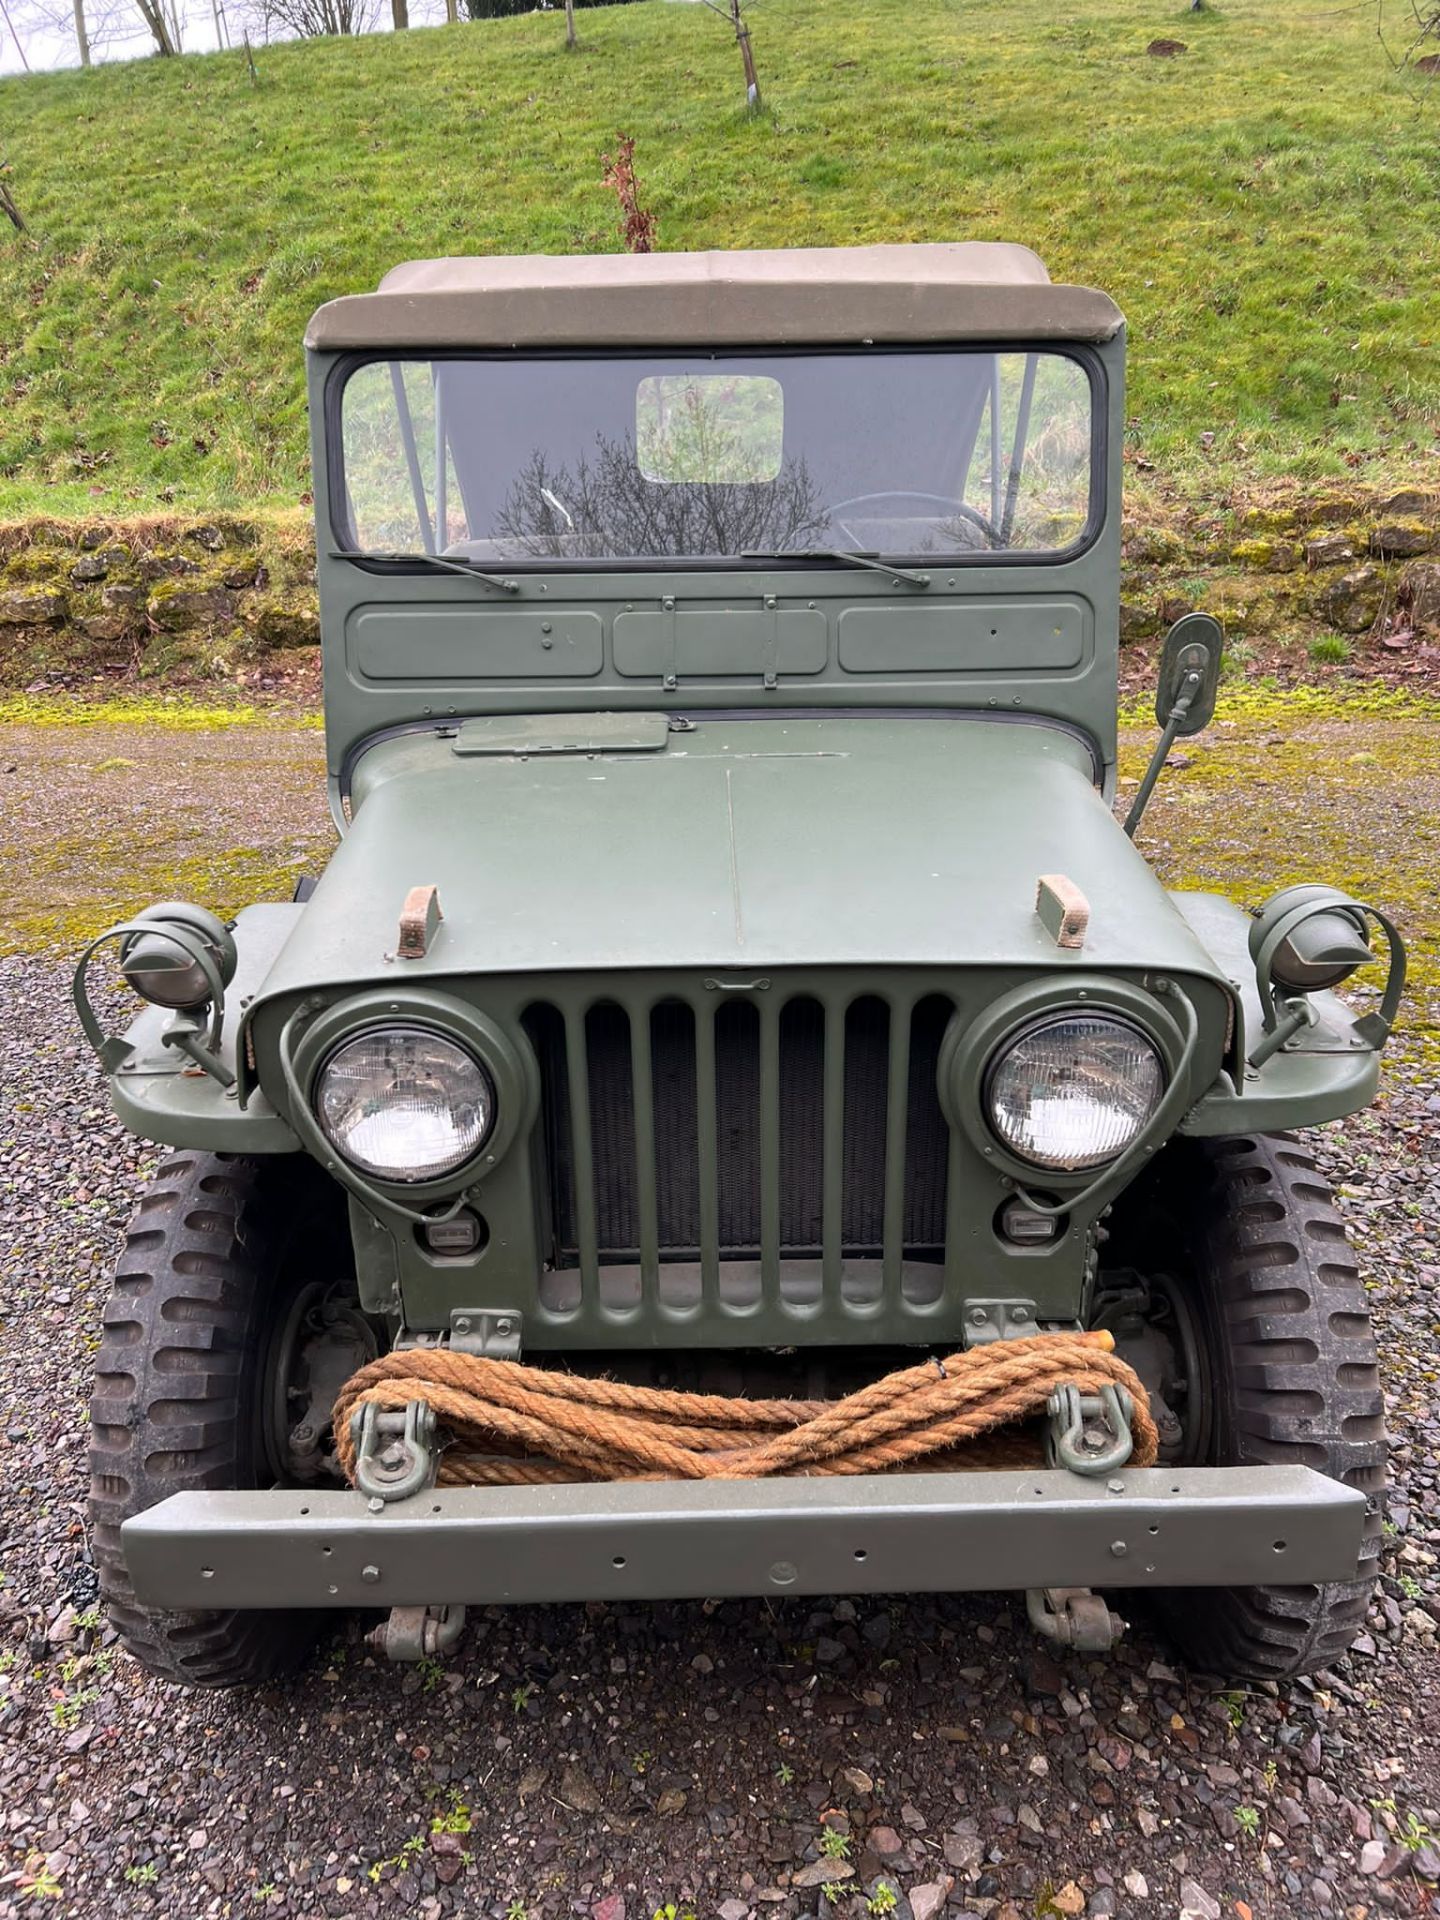 1945 Willys Jeep - Military Vehicle - Restored and raring to go... - Image 3 of 13